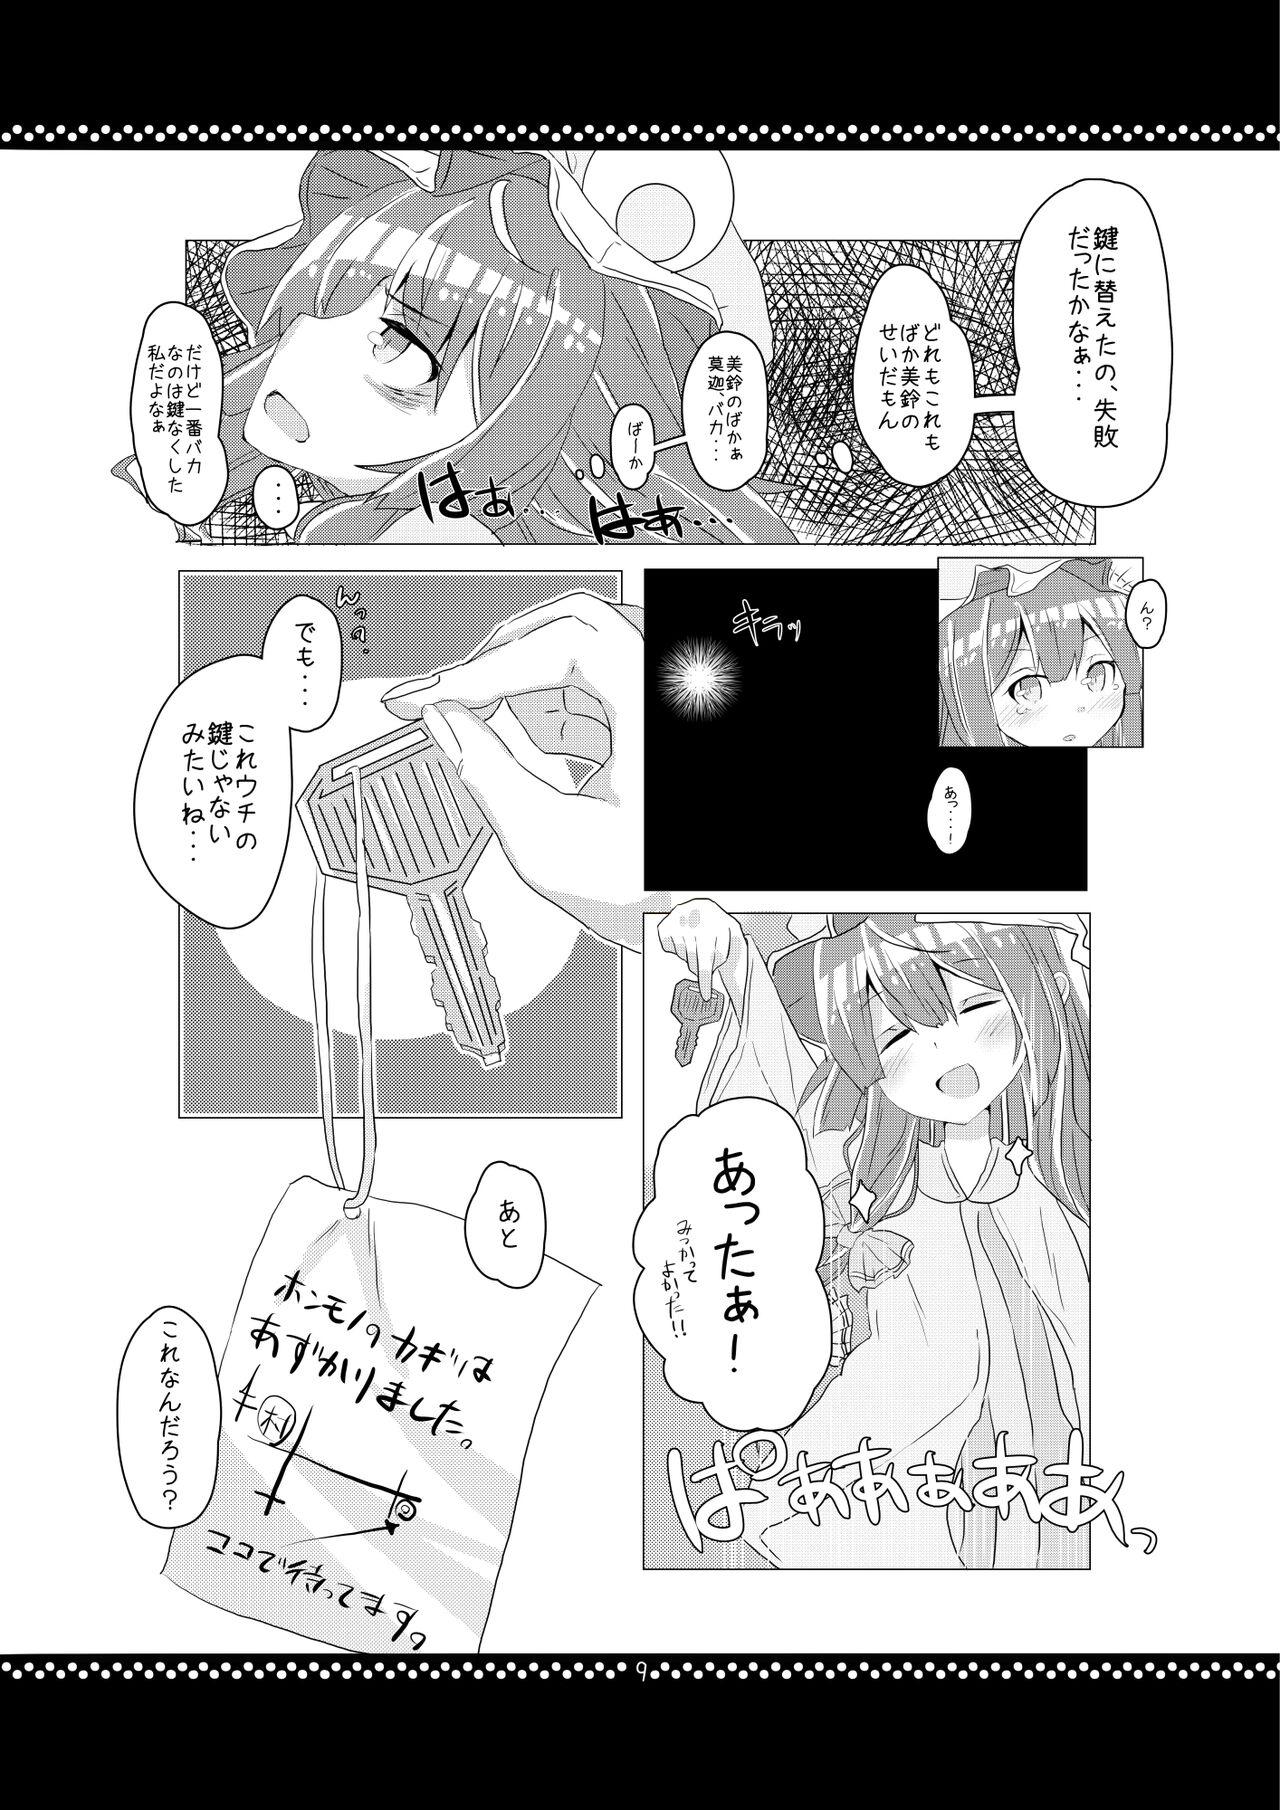 Leaked 従順？パチュリーさま！ - Touhou project Amateur Asian - Page 8